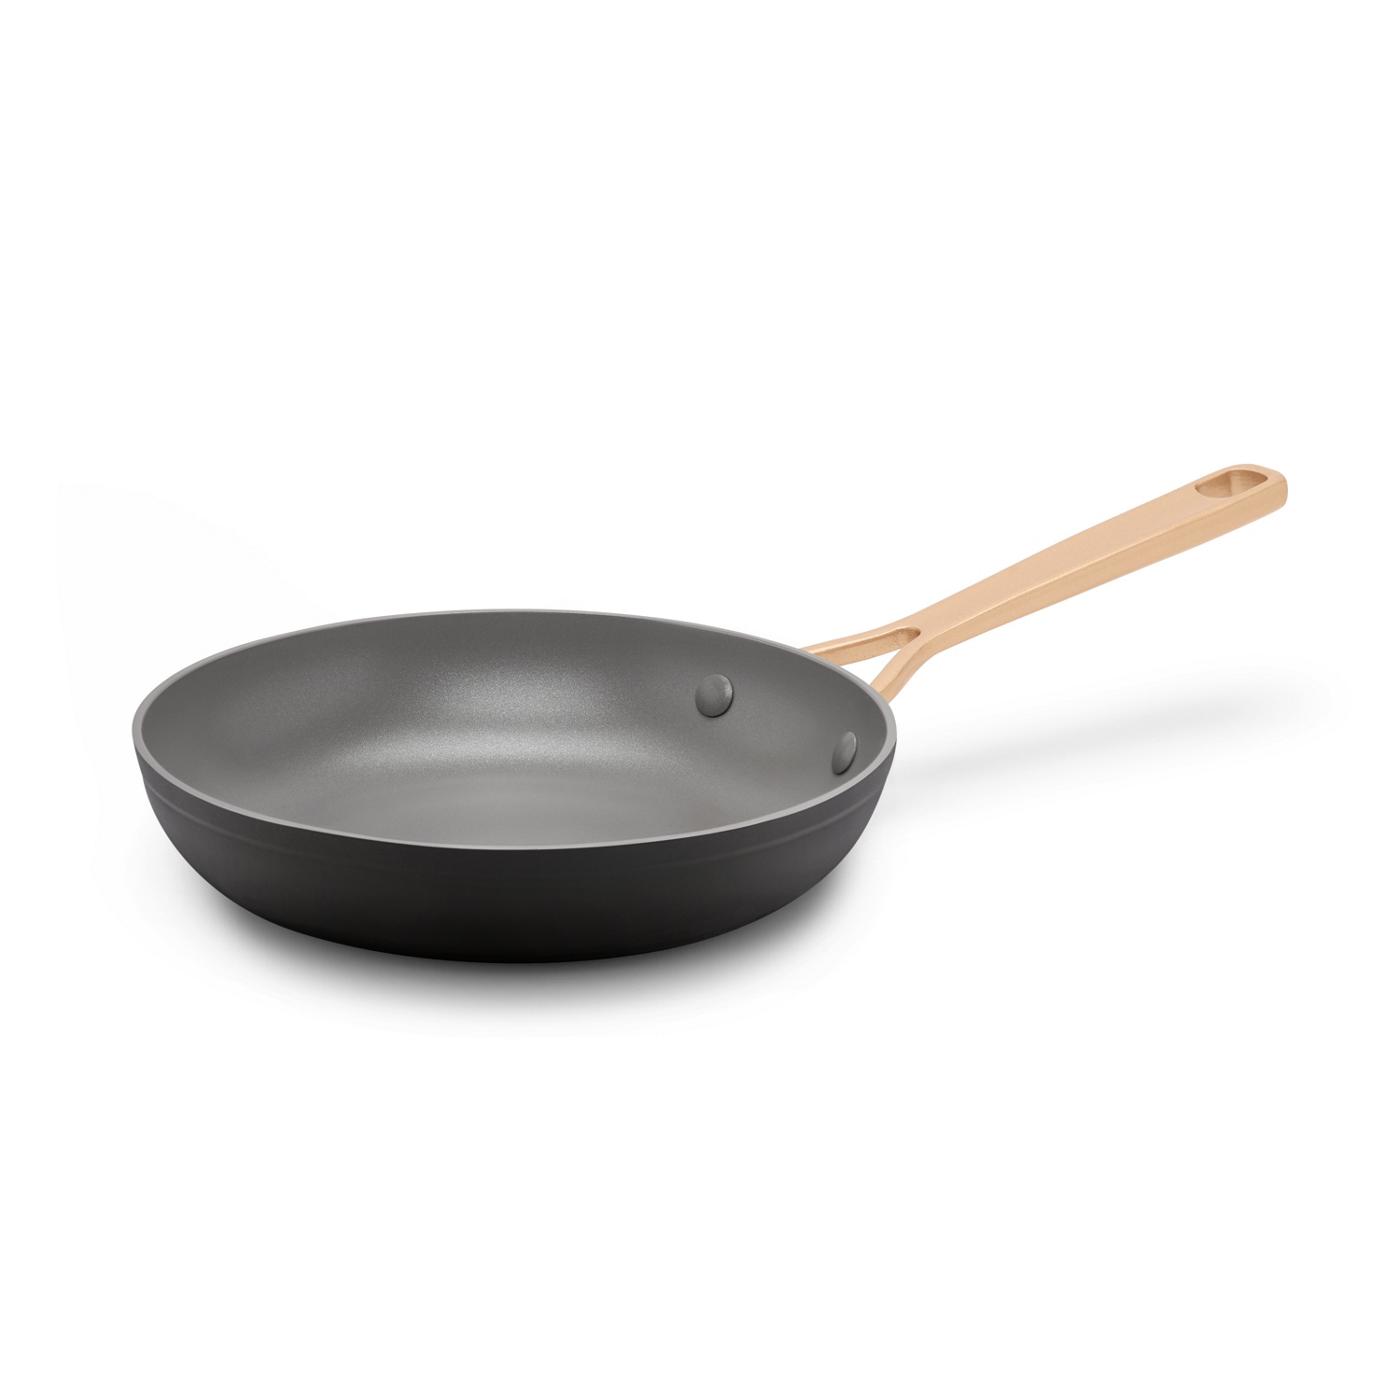 Kitchen & Table by H-E-B Non-Stick Fry Pan - Classic Black; image 1 of 6